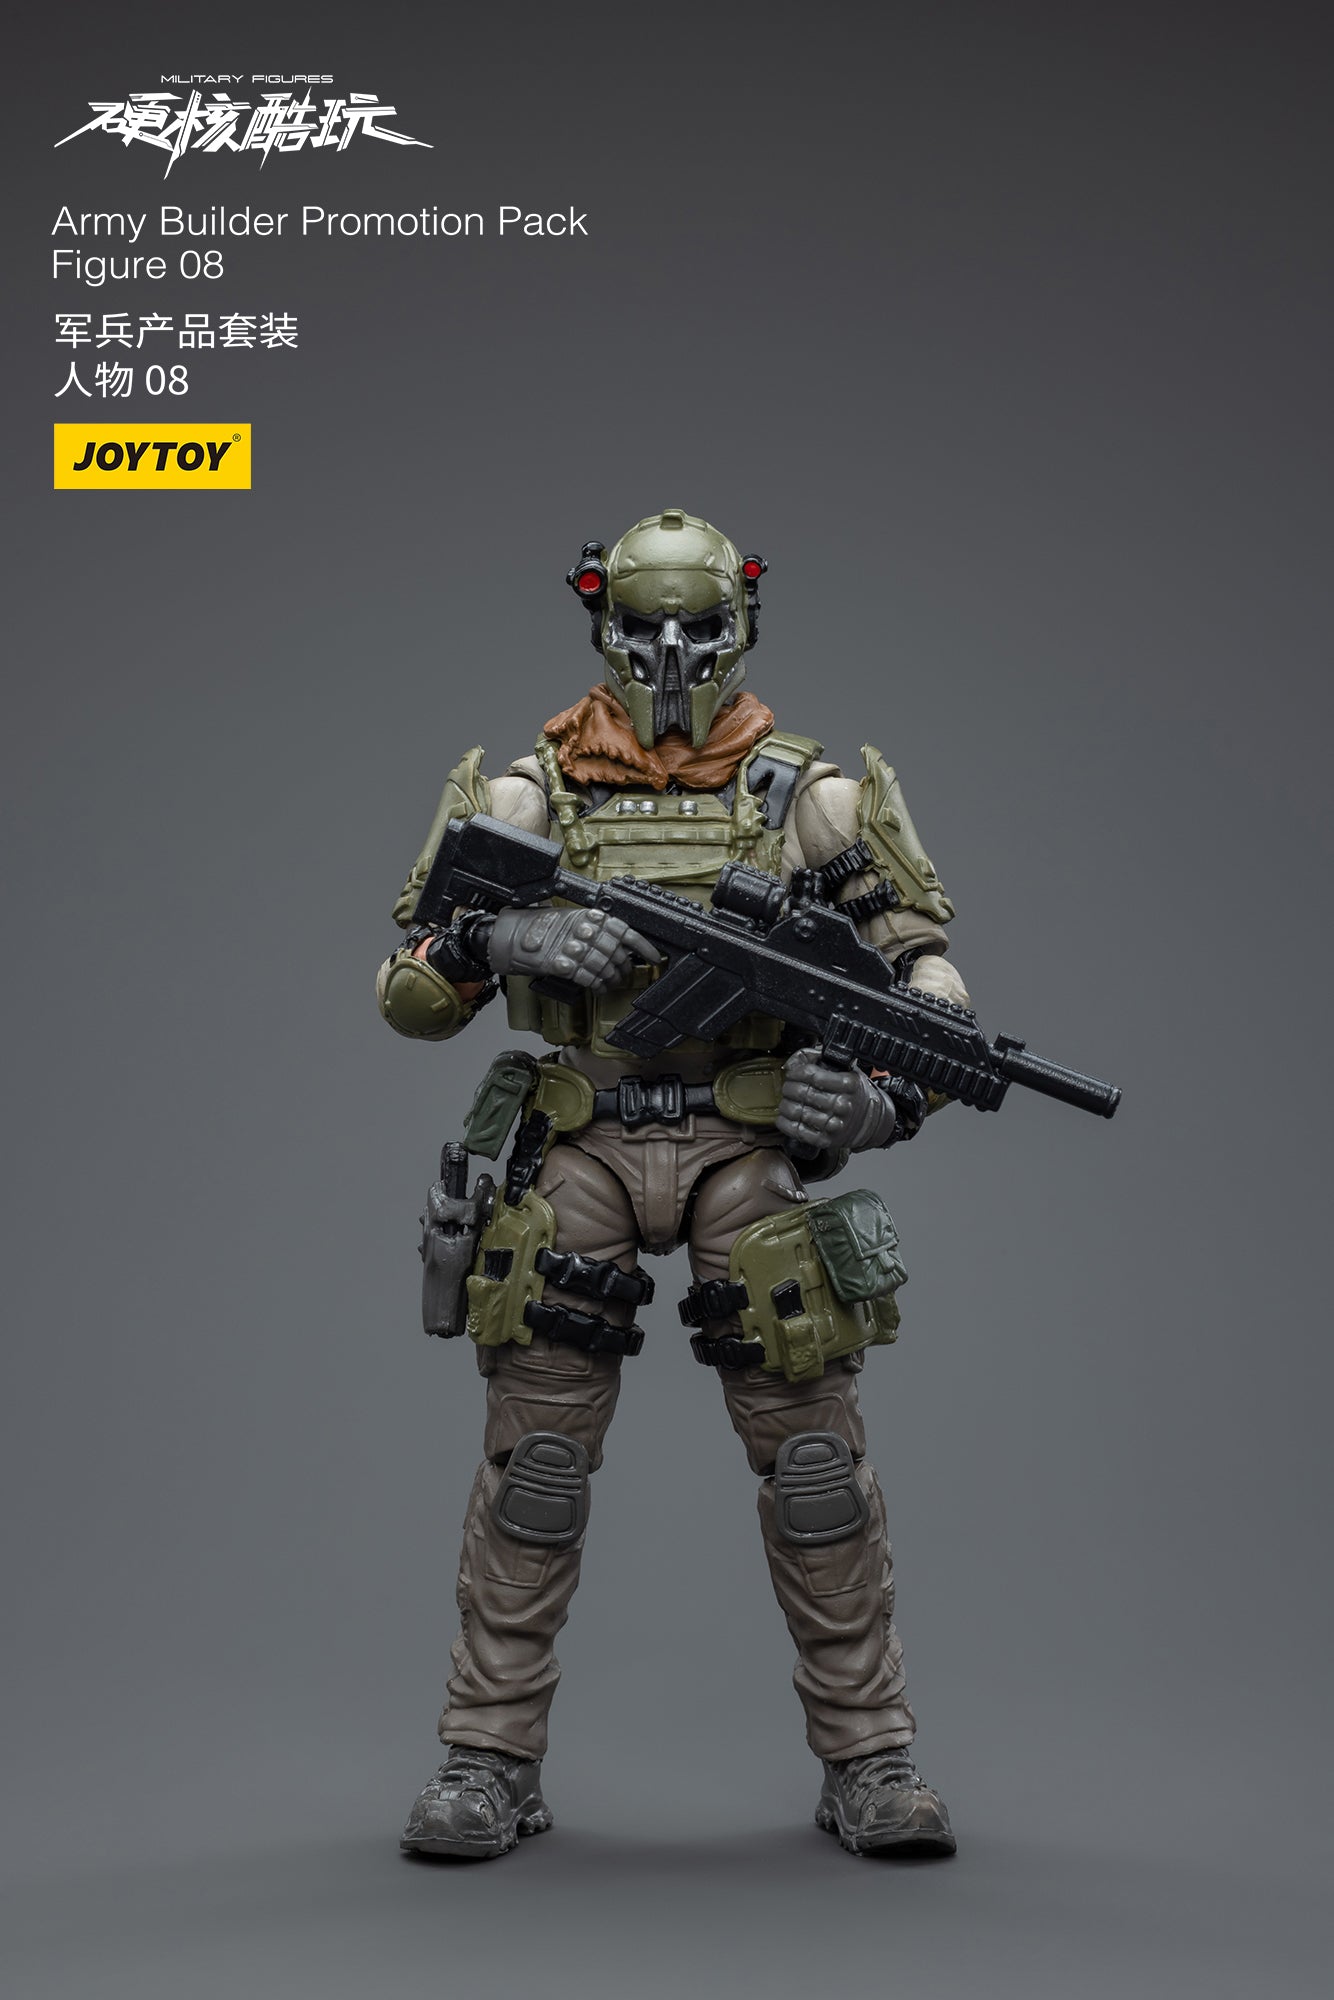 Army Builder Promotion Pack Figure 08 - Military Action Figure By JOYTOY